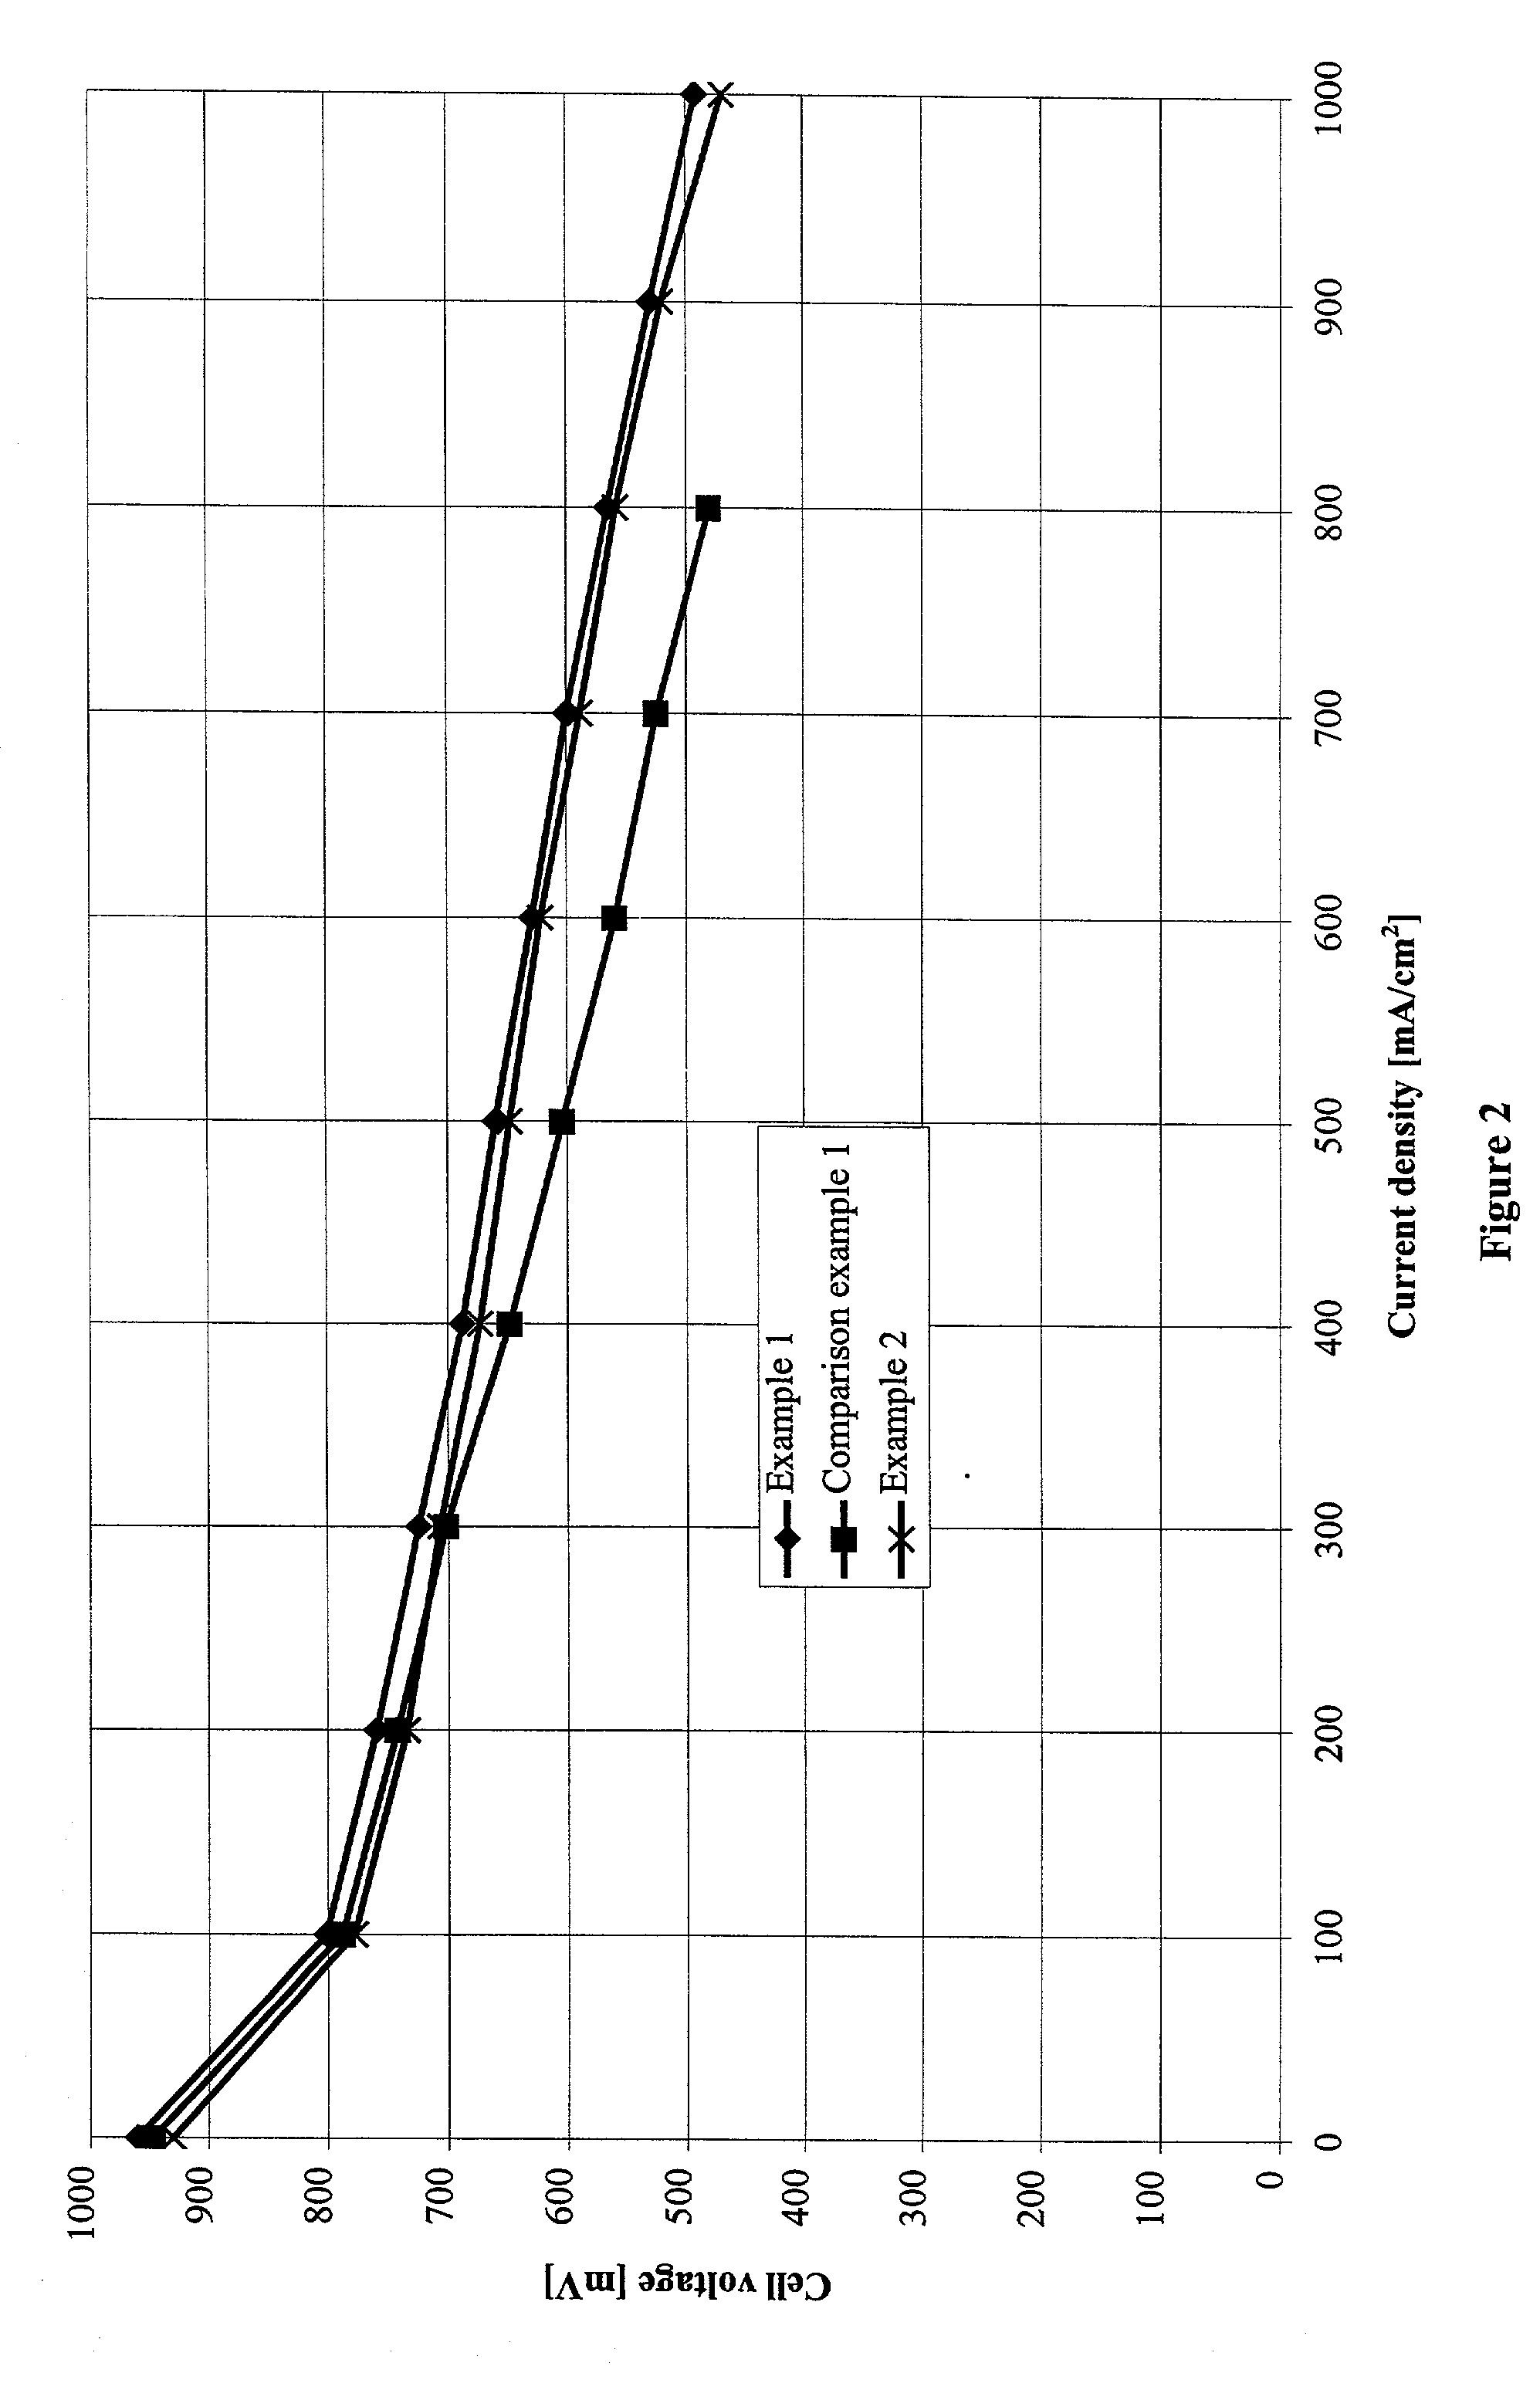 Gas diffusion structures and gas diffusion electrodes for polymer electrolyte fuel cells